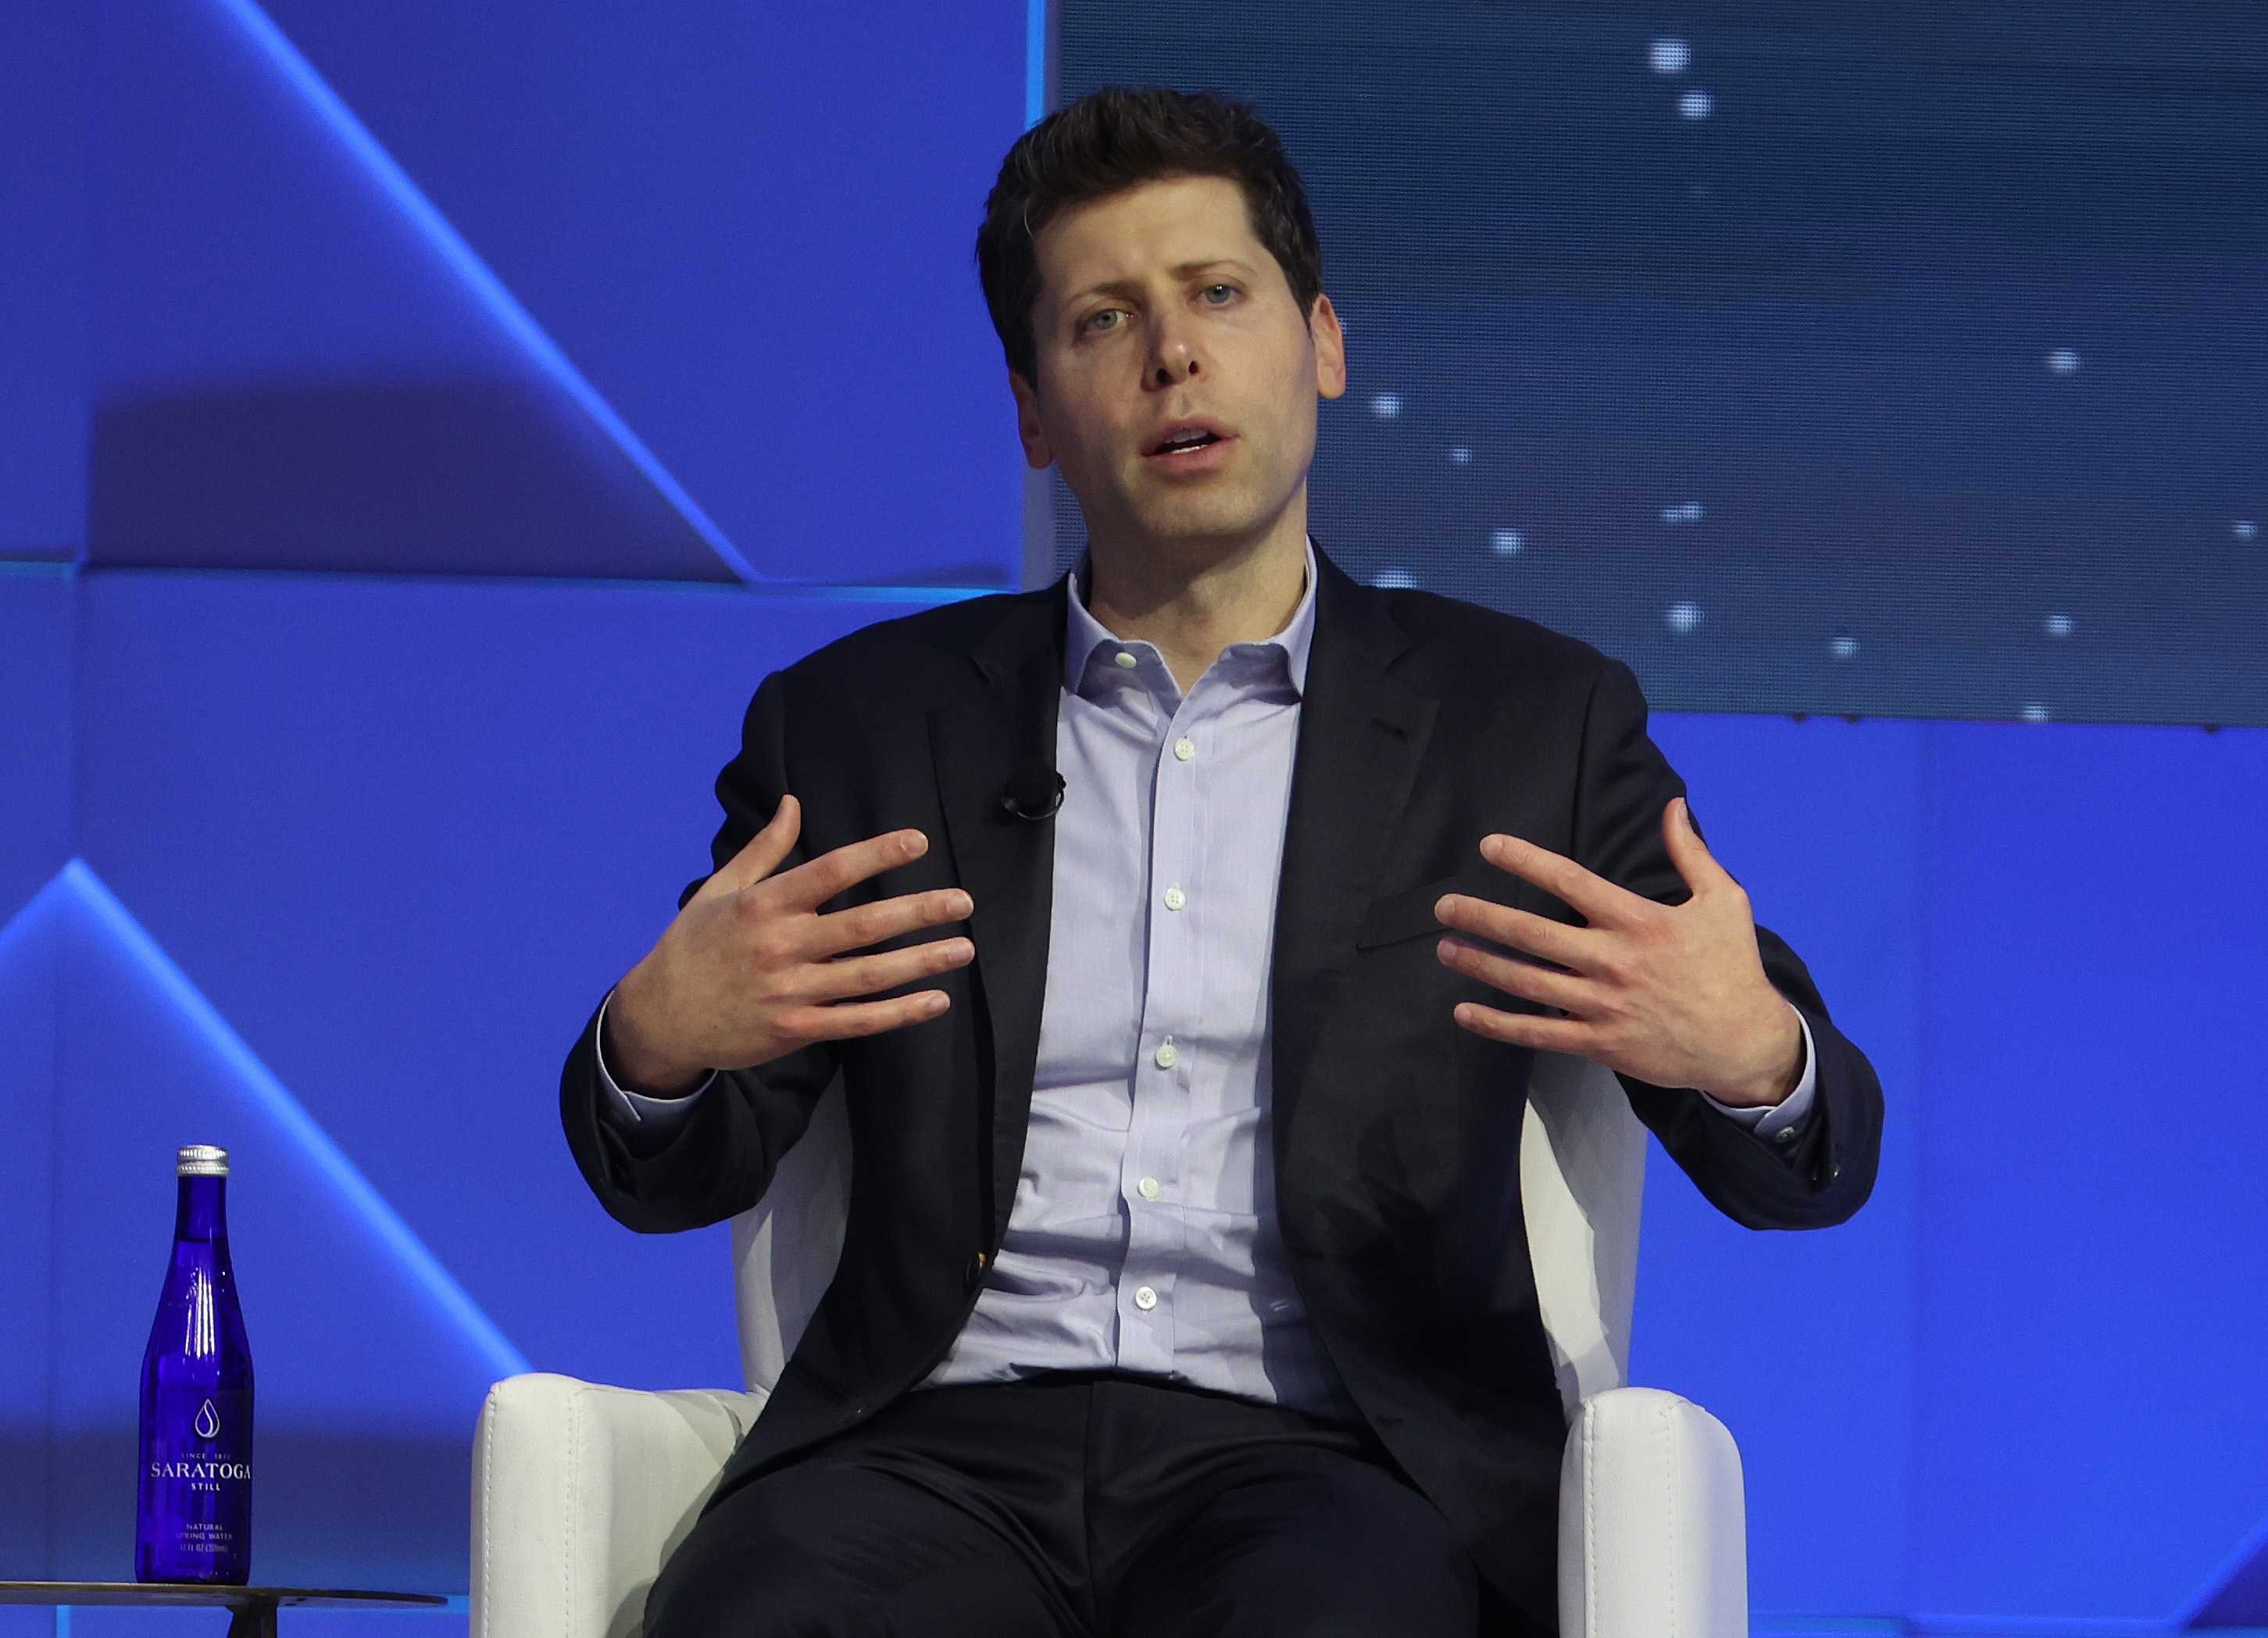 What does Sam Altman's firing — and quick reinstatement — mean for
the future of AI?